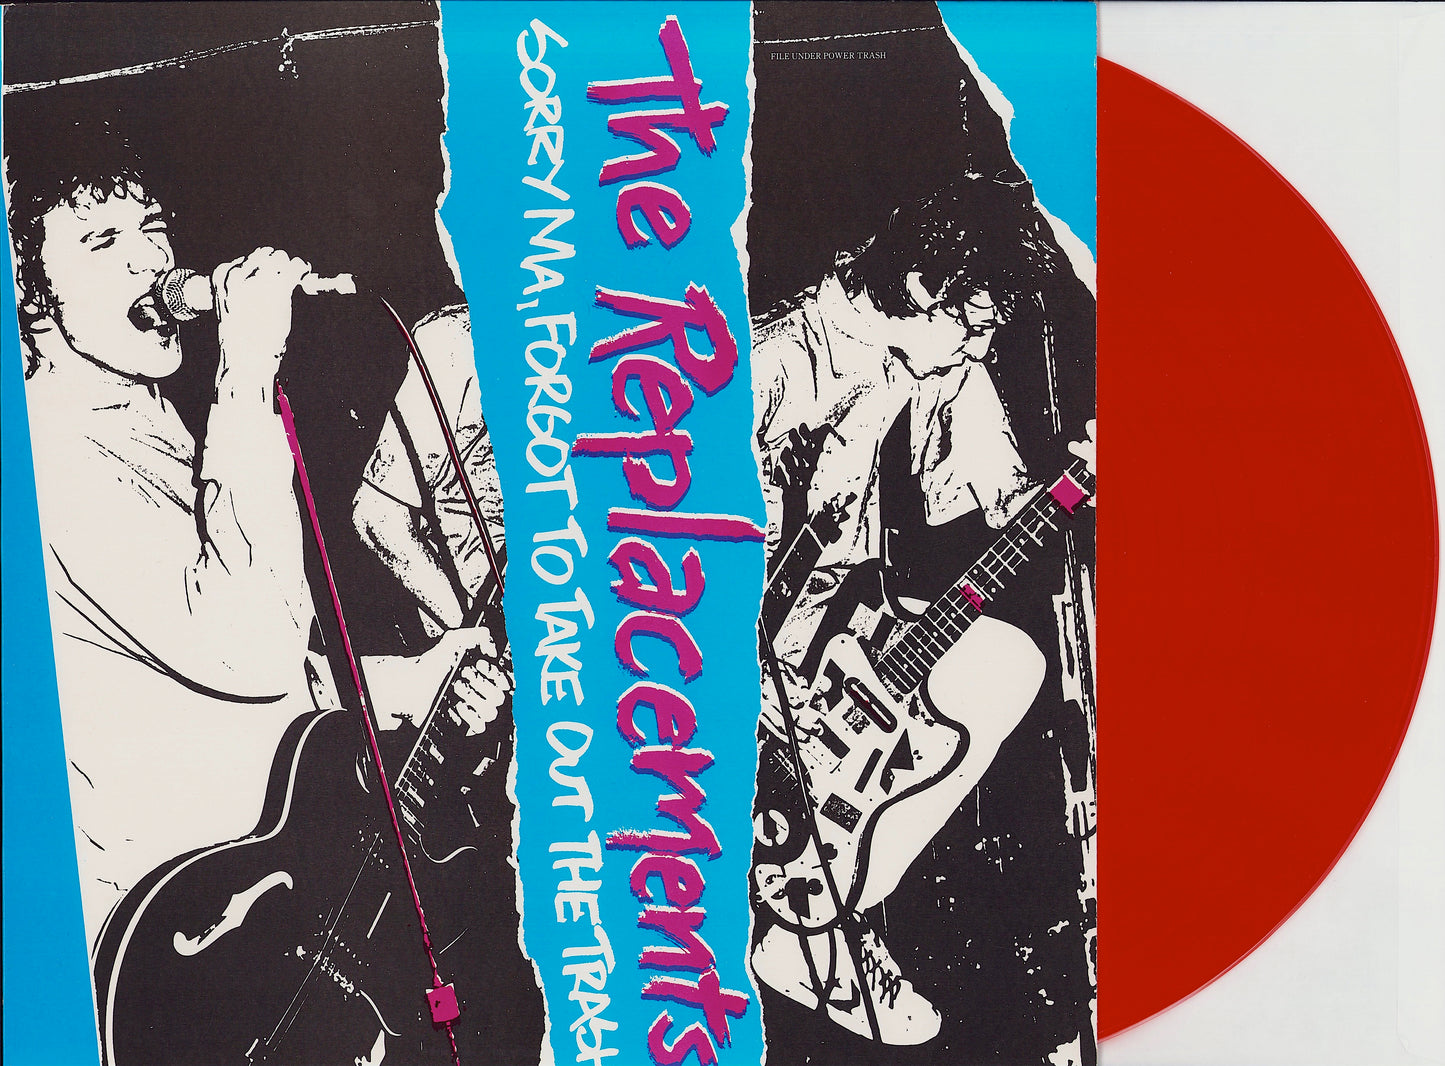 The Replacements ‎- Sorry Ma, Forgot To Take Out The Trash (Red Vinyl LP)